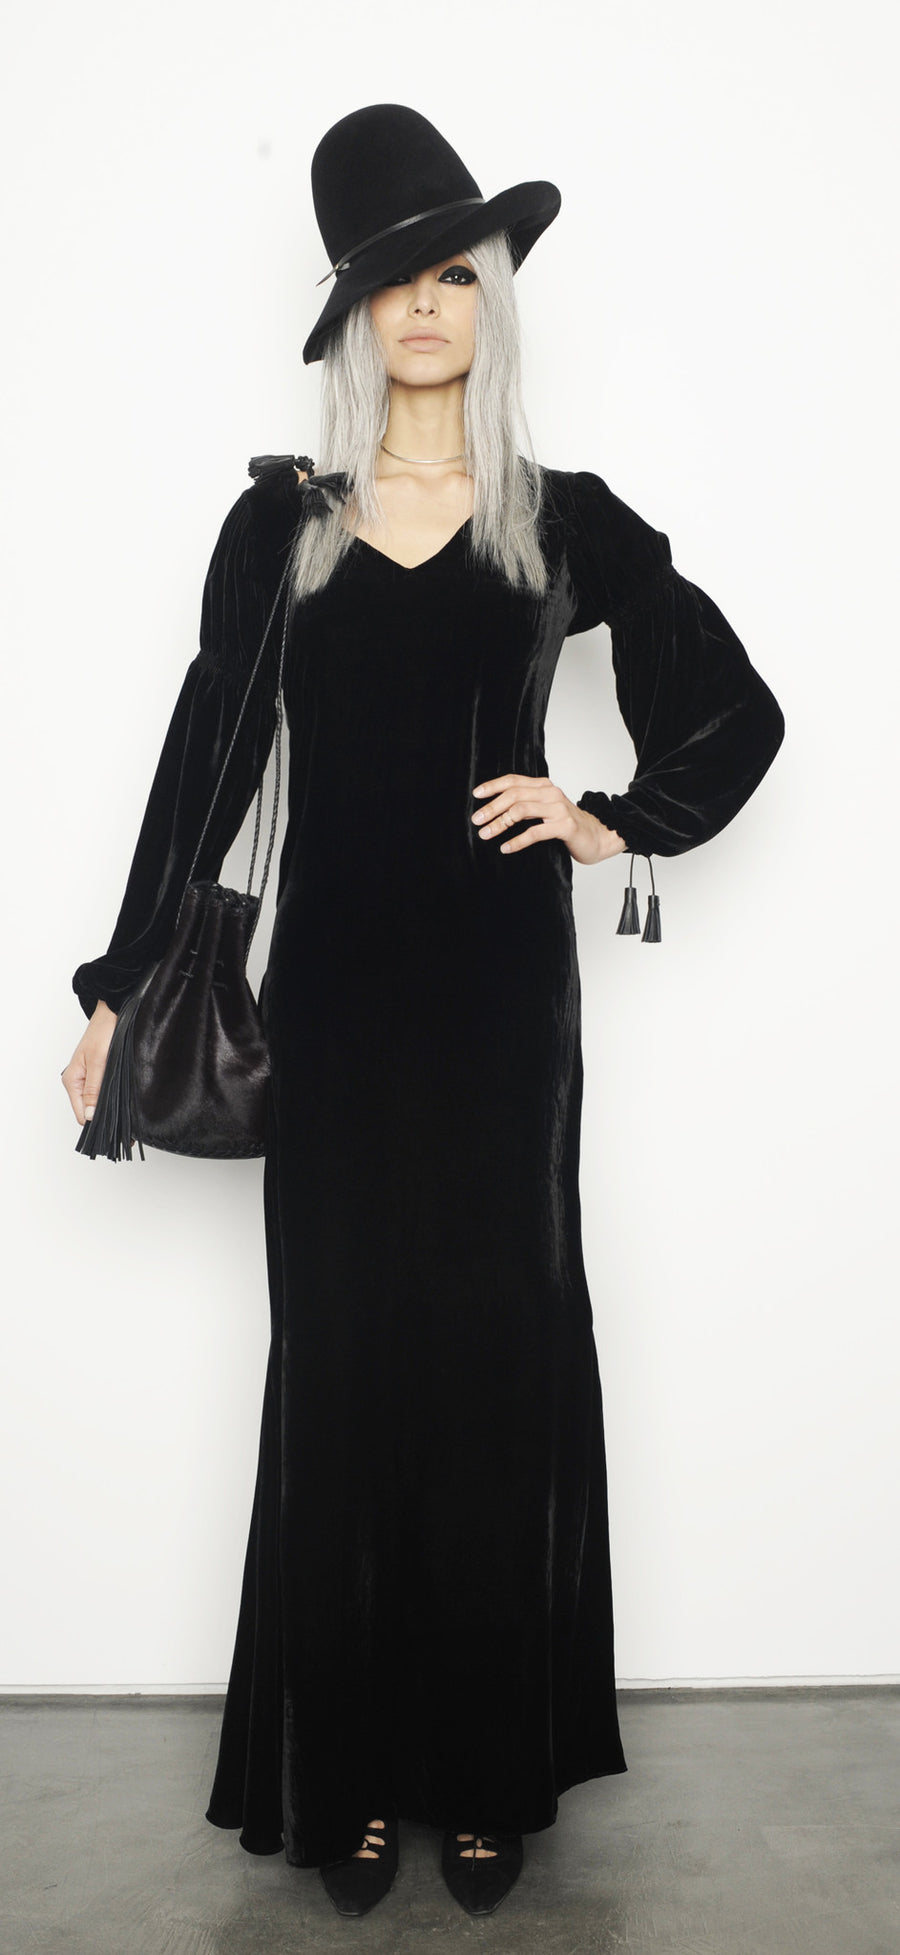 Monic IMG model Wendy Nichol Clothing Fashion Designer Runway Show AW15 Queen of Thieves Black Silk Velvet Dress Renaissance Puff Sleeve Gray Grey Hair Girl Gangster Peaky Blinders Handmade in NYC Custom Tailoring Color Fabric Made to Measure 